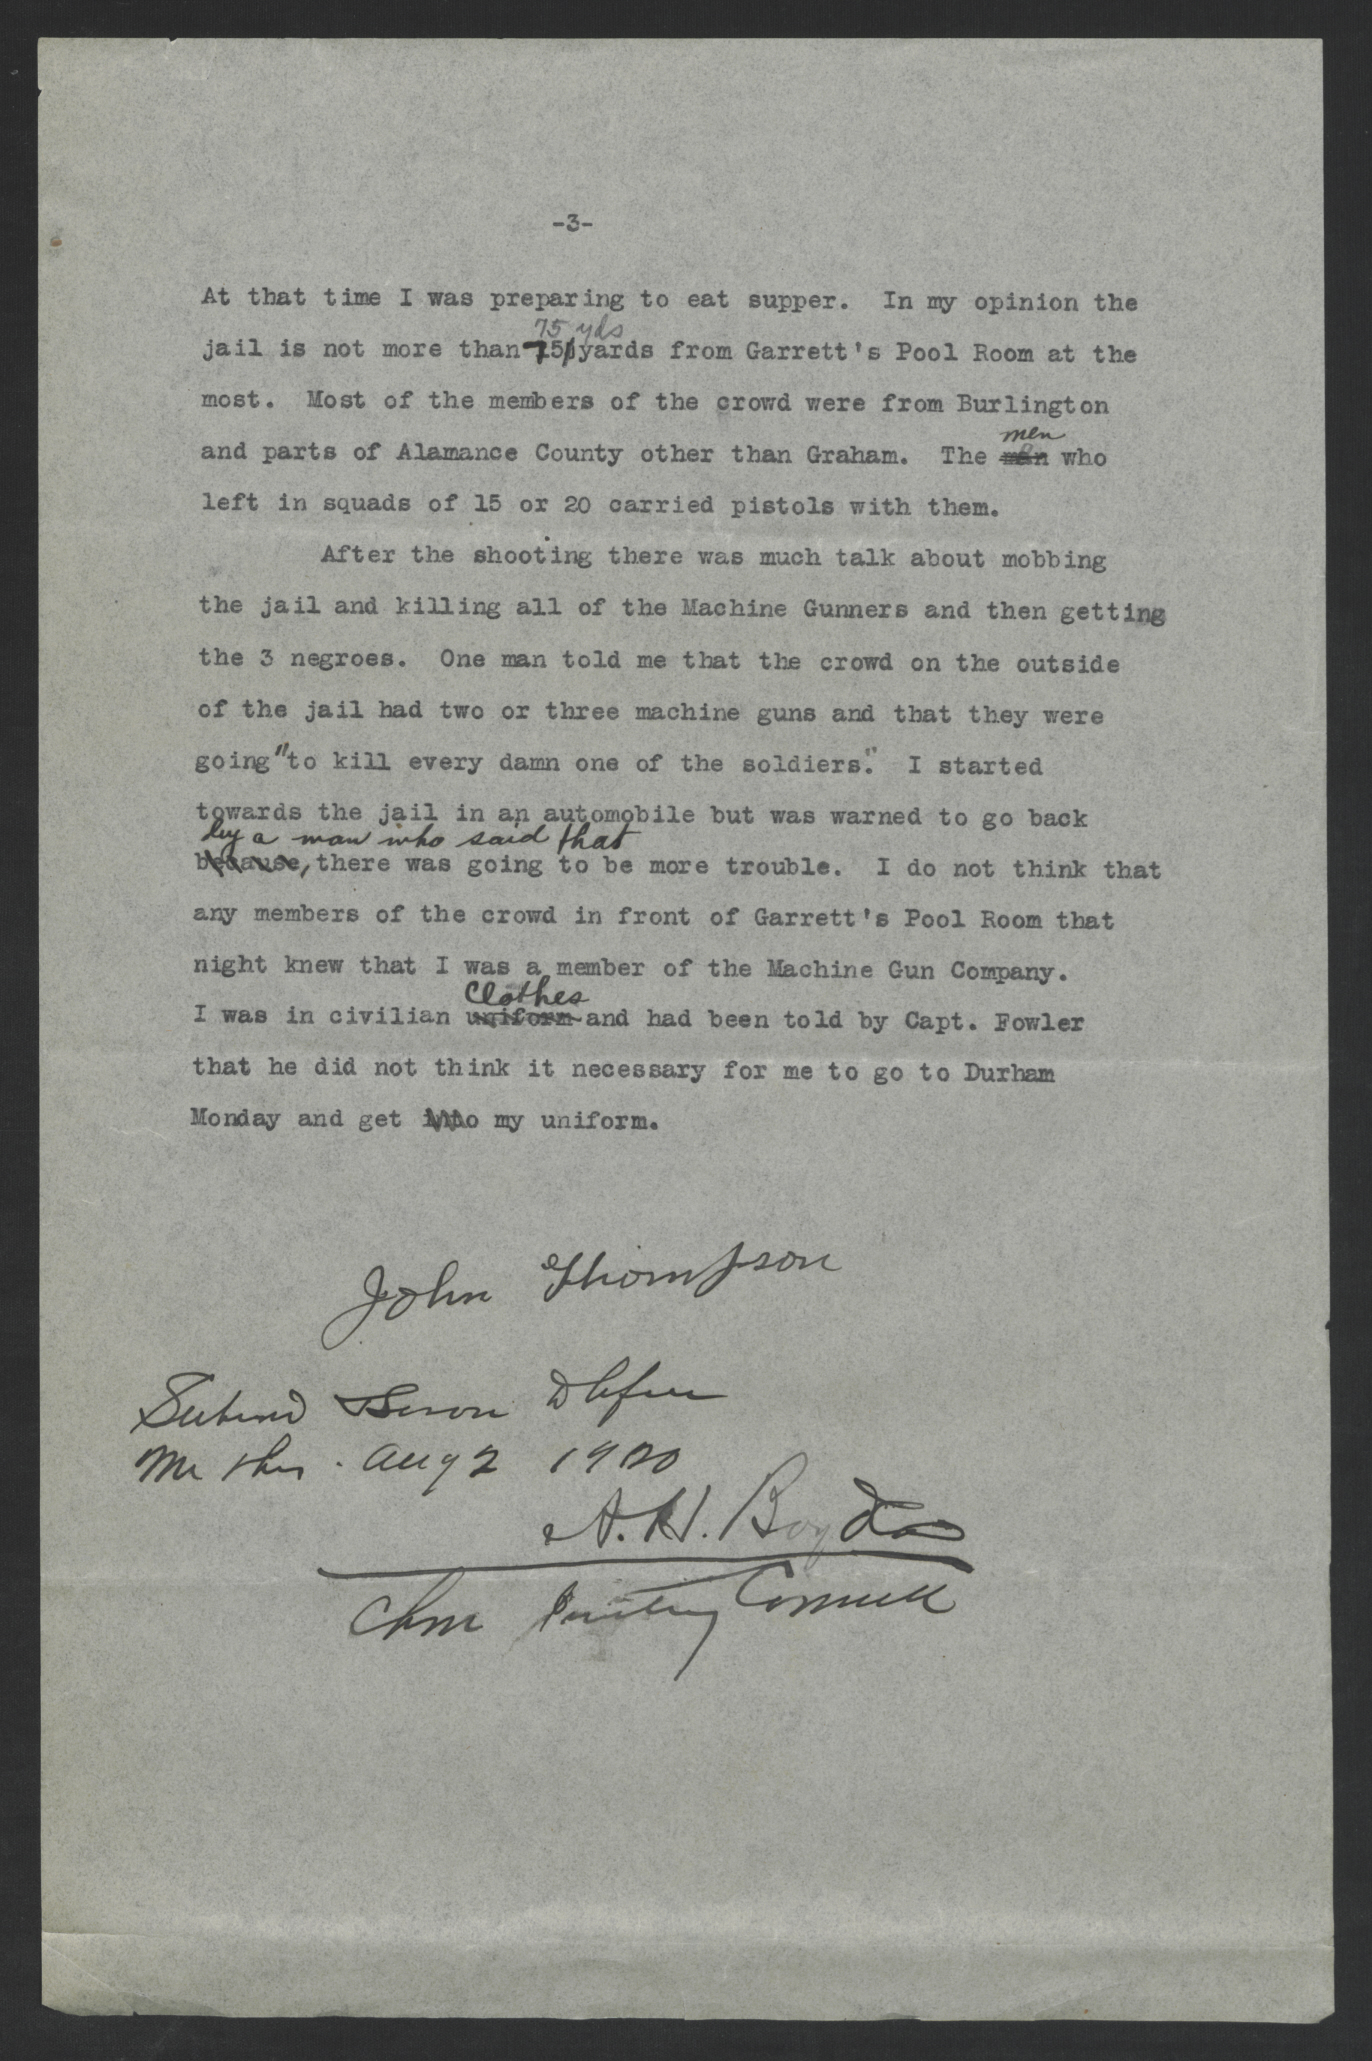 Testimony of Private John Thompson, August 2, 1920, page 3